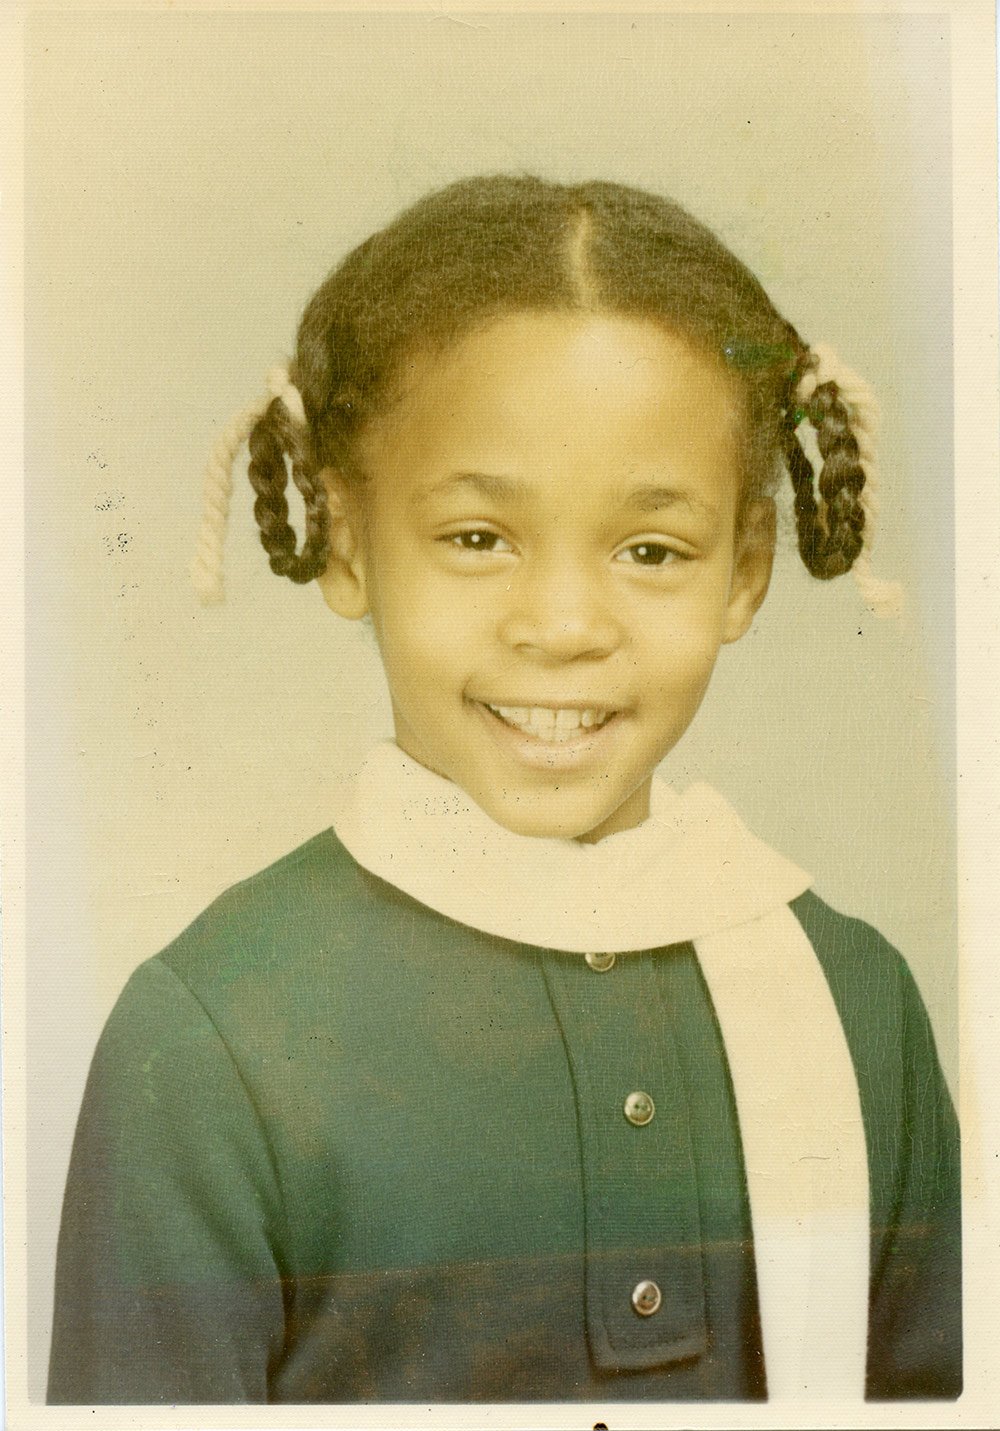 A childhood photo of Nippy.